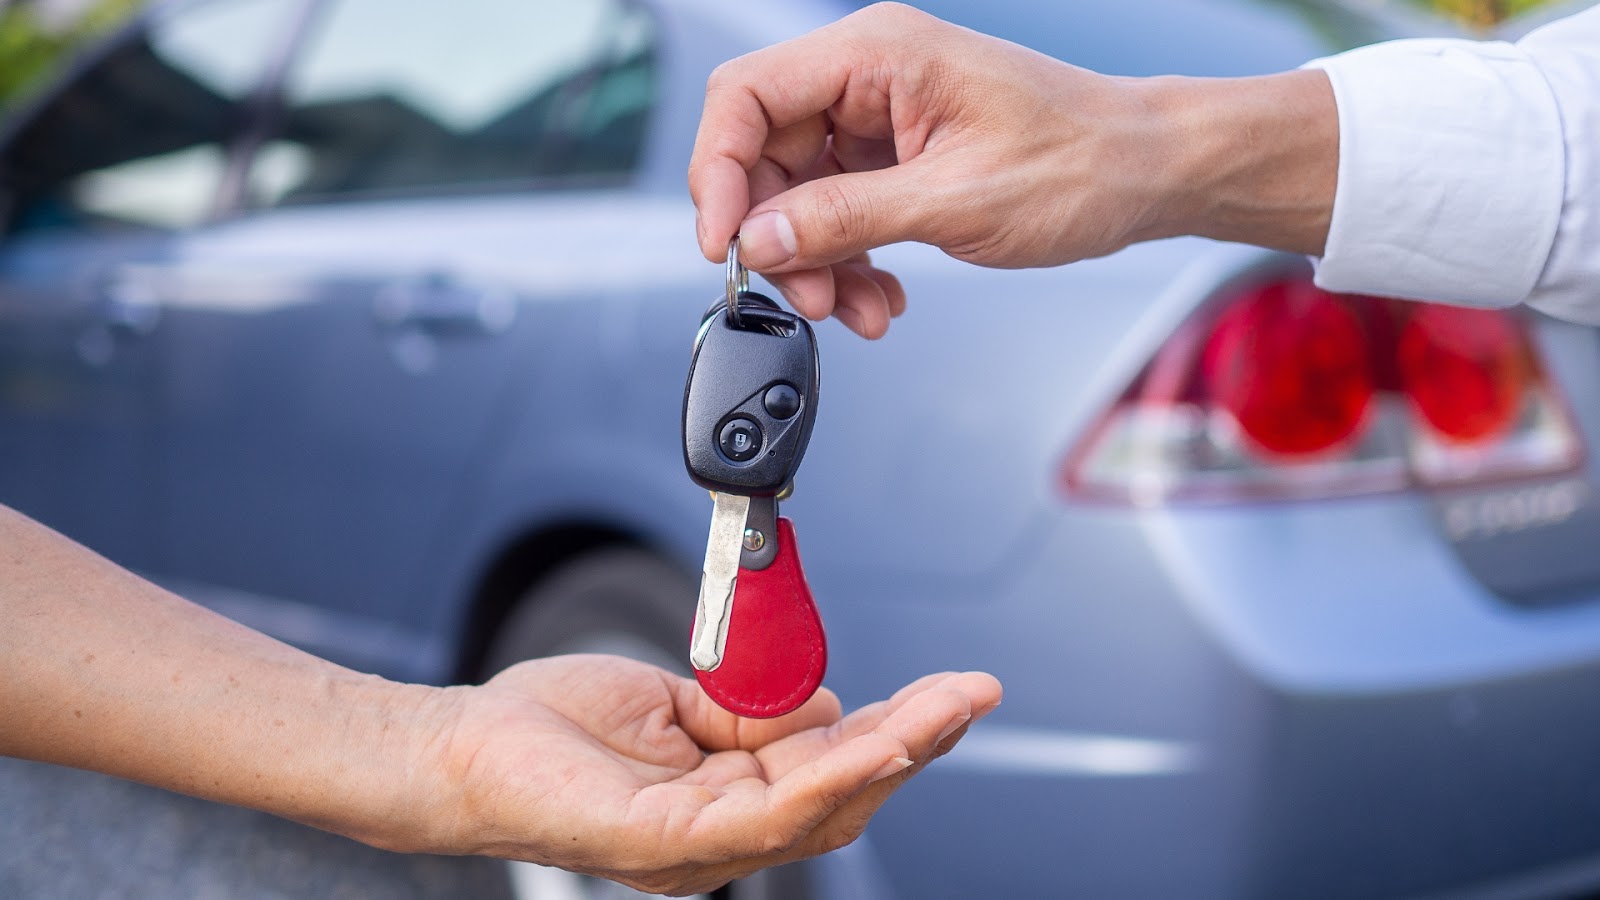 A new car key replacement being handed to a car owner